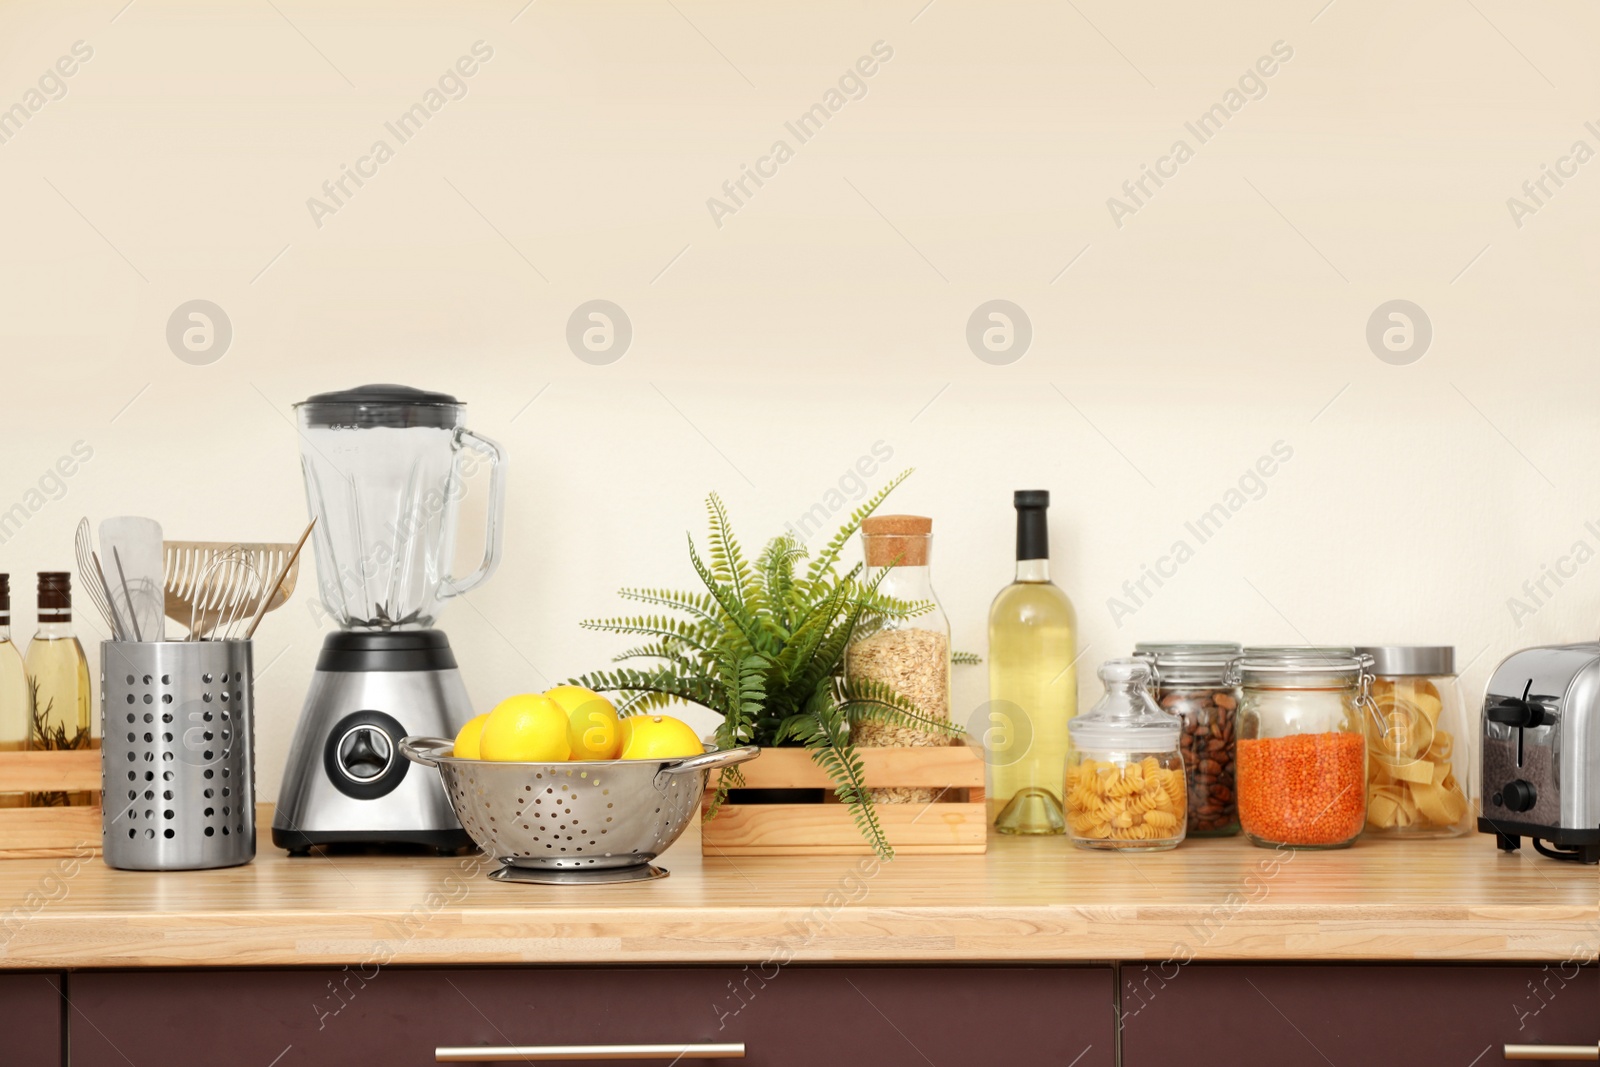 Photo of Wooden countertop with appliances and products near white wall. Kitchen interior idea